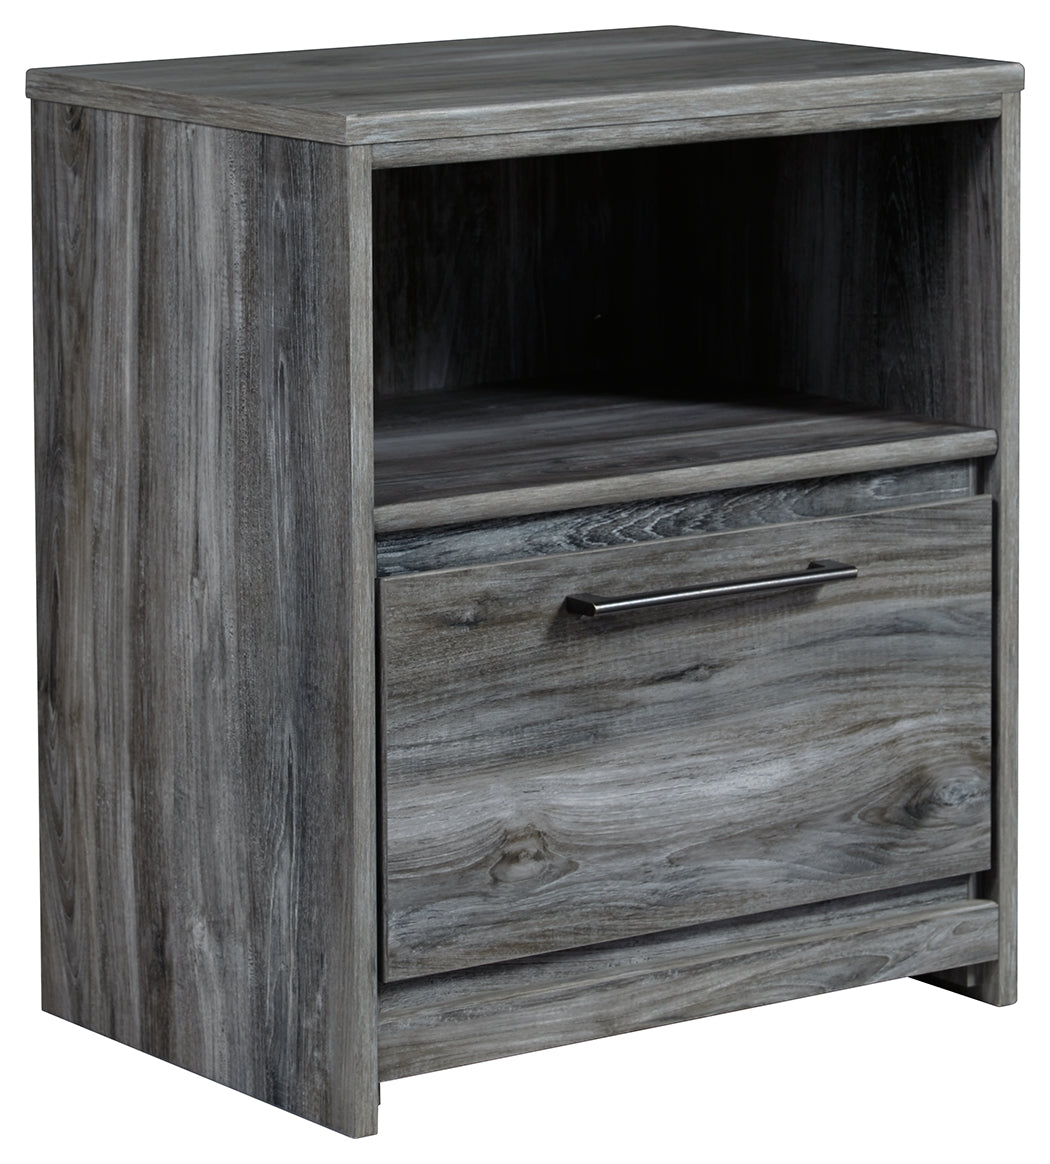 Baystorm Signature Design by Ashley Nightstand